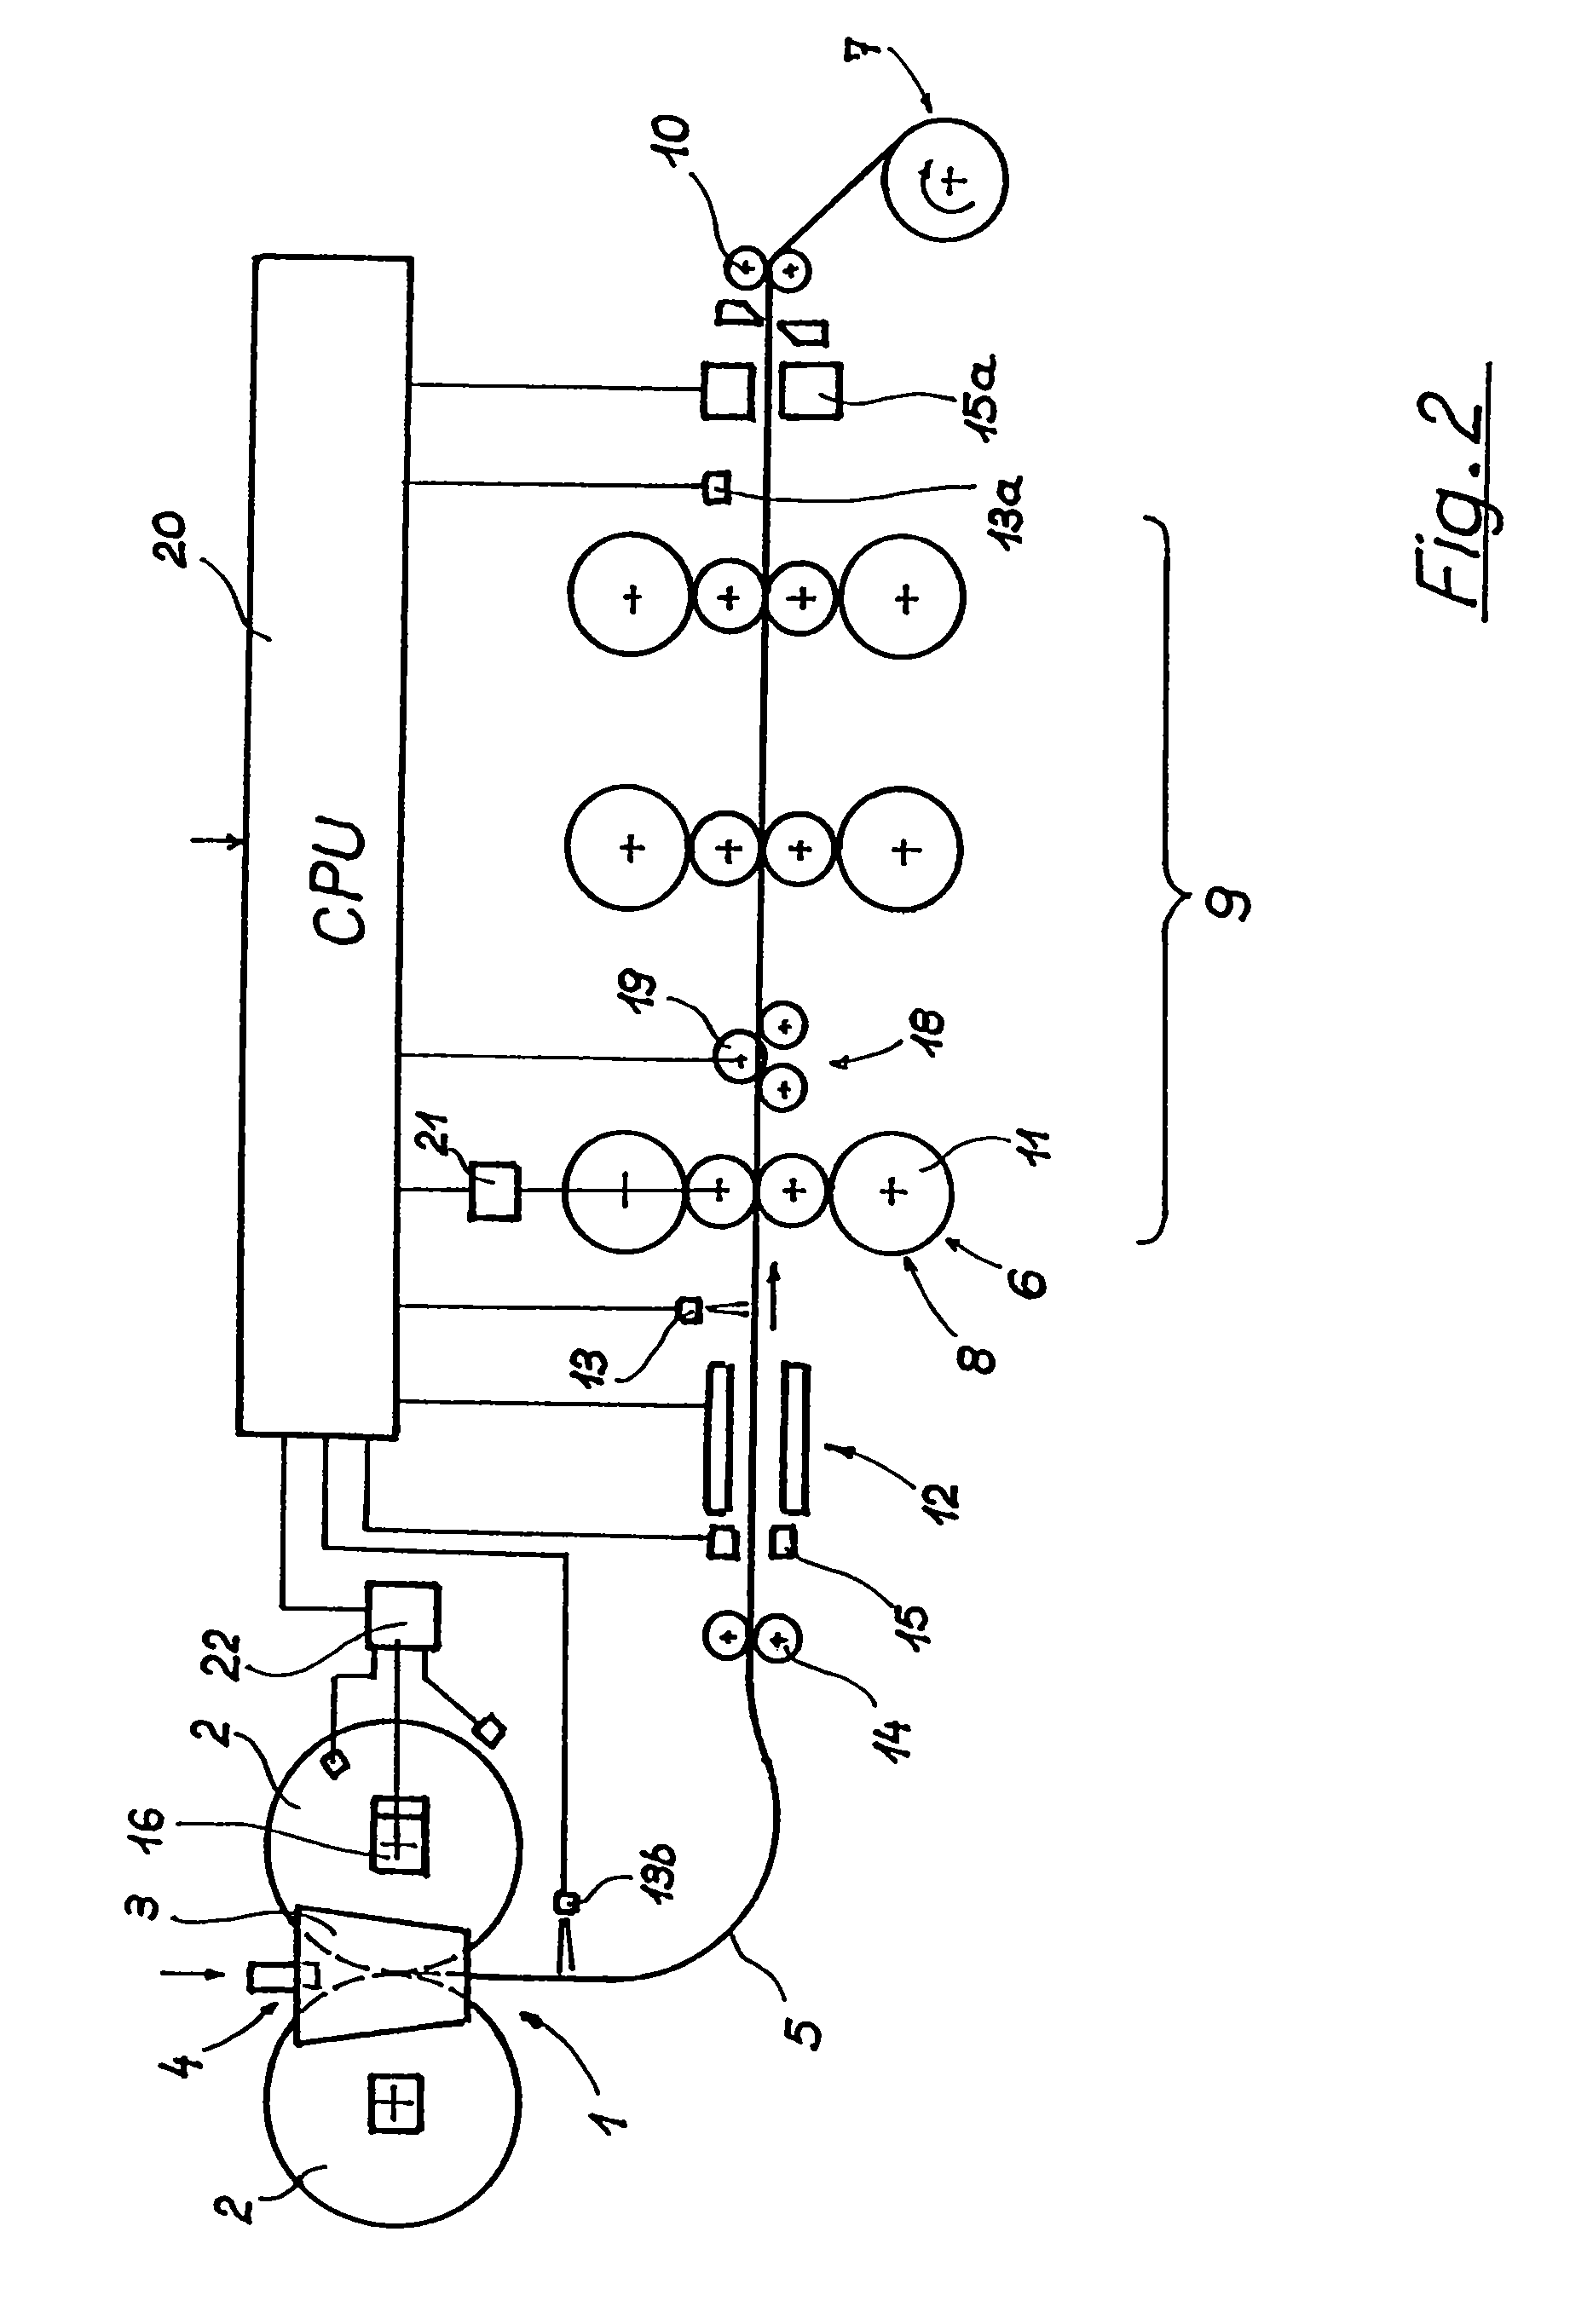 Process and apparatus for the continuous production of a thin metal strip